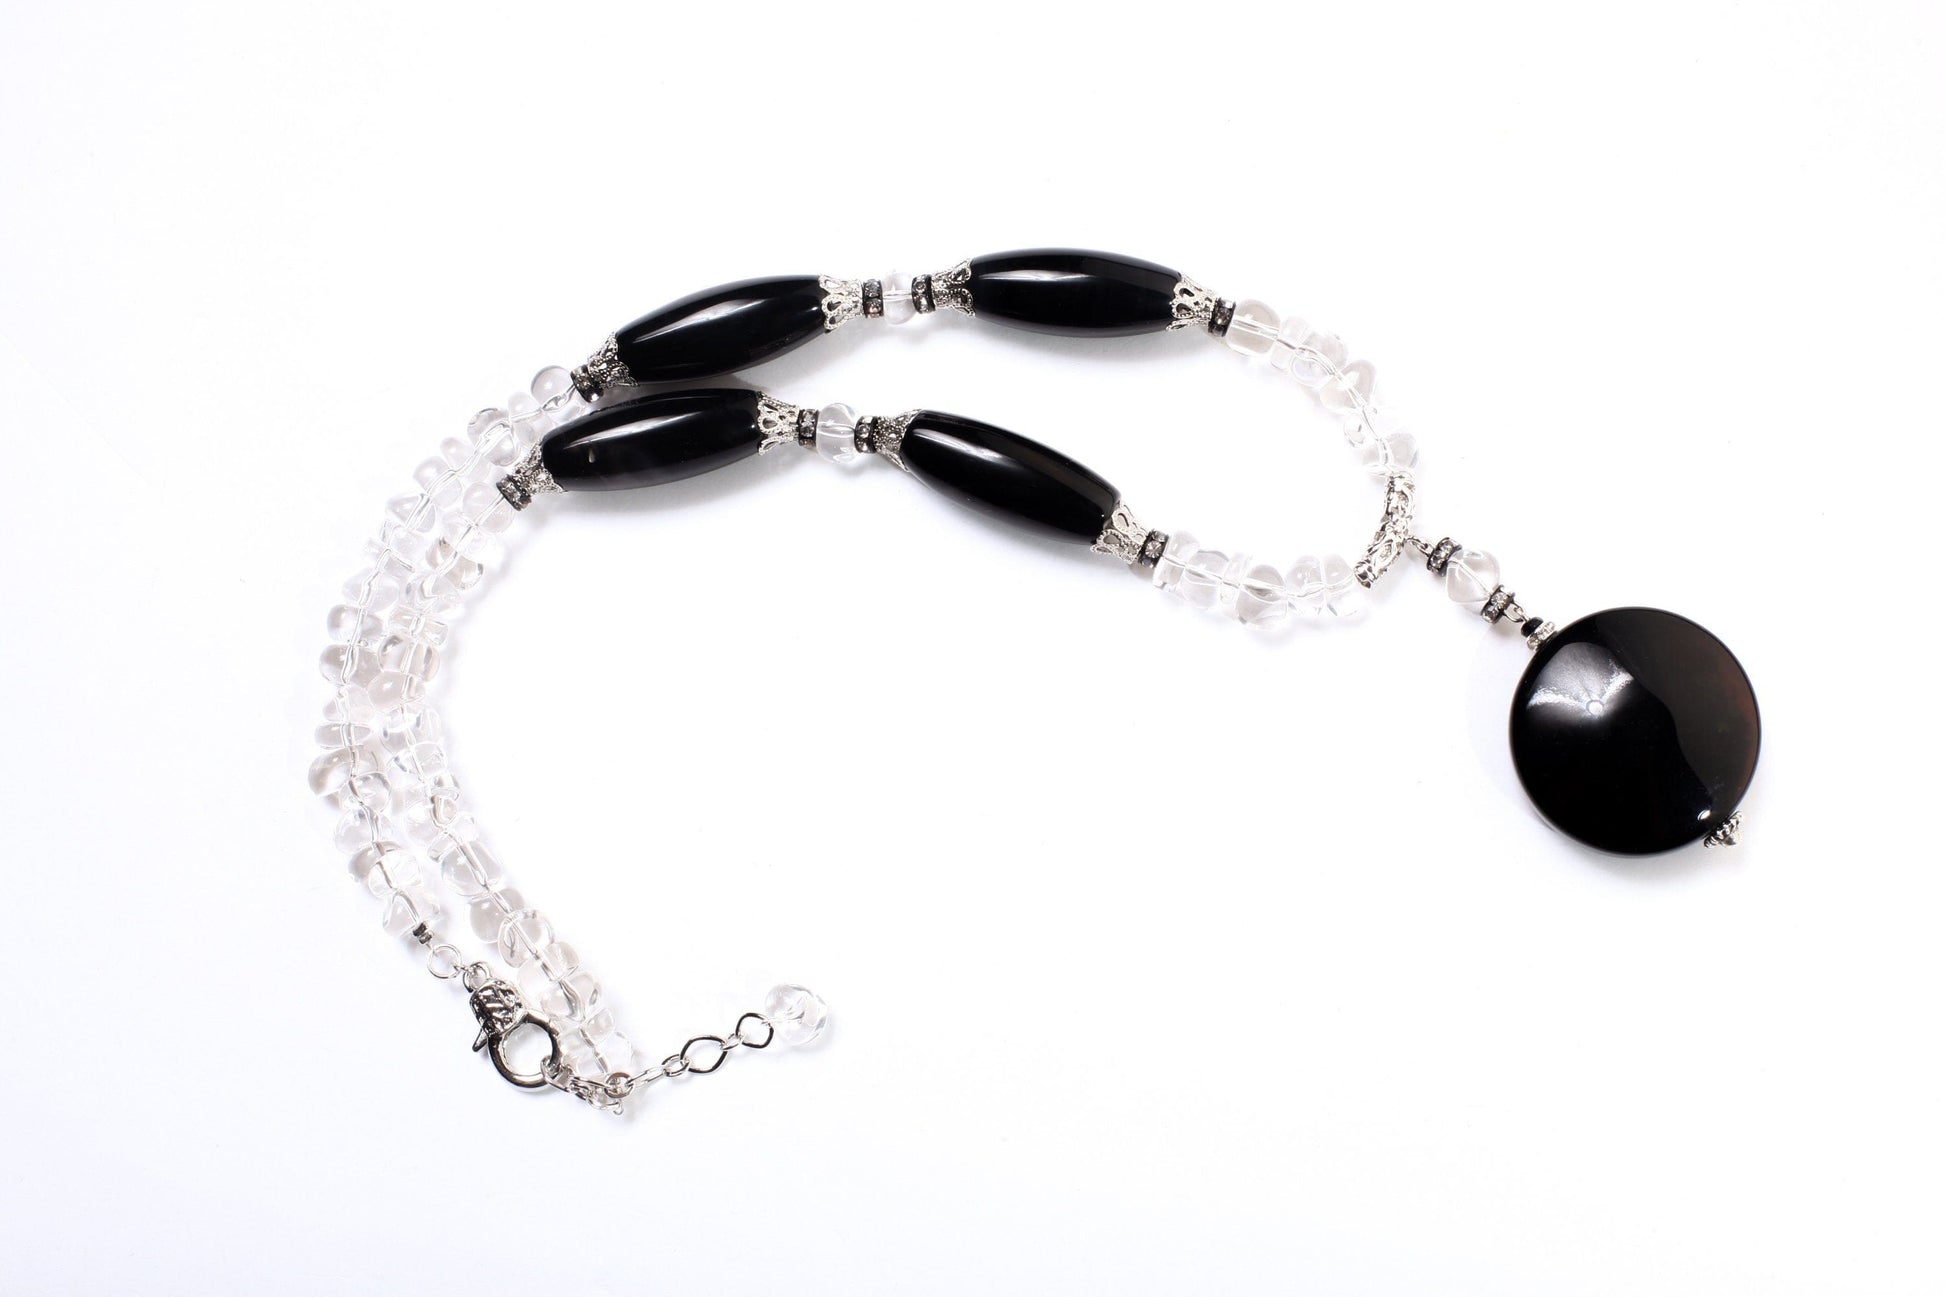 Natural Rock crystal tumble nugget,Black Agate 38mm Disk Pendant,Black Agate 14x34mm Long Oval Barrel Necklace 21&quot; with 2&quot; Extension,healing